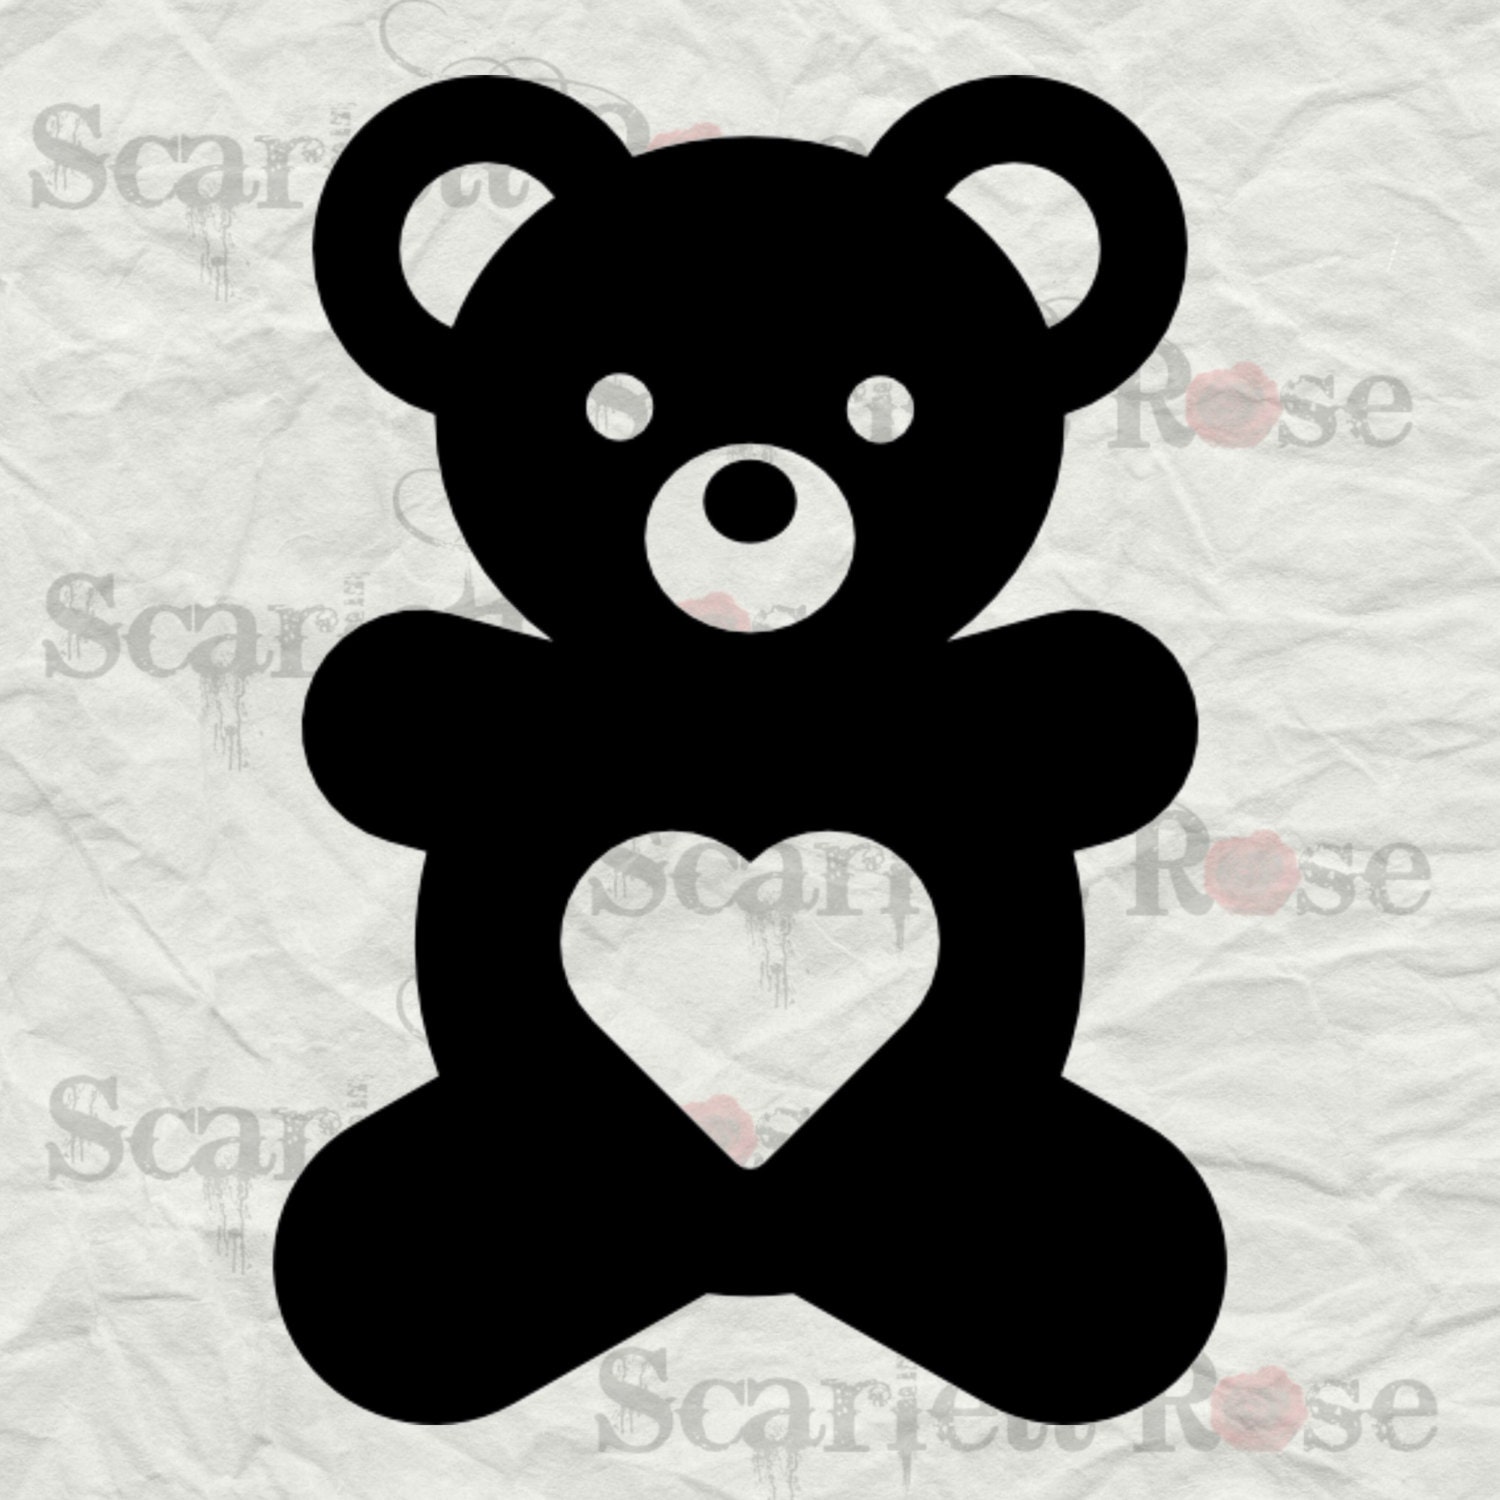 Download Teddy Bear in Black and White SVG cutting file clipart in svg